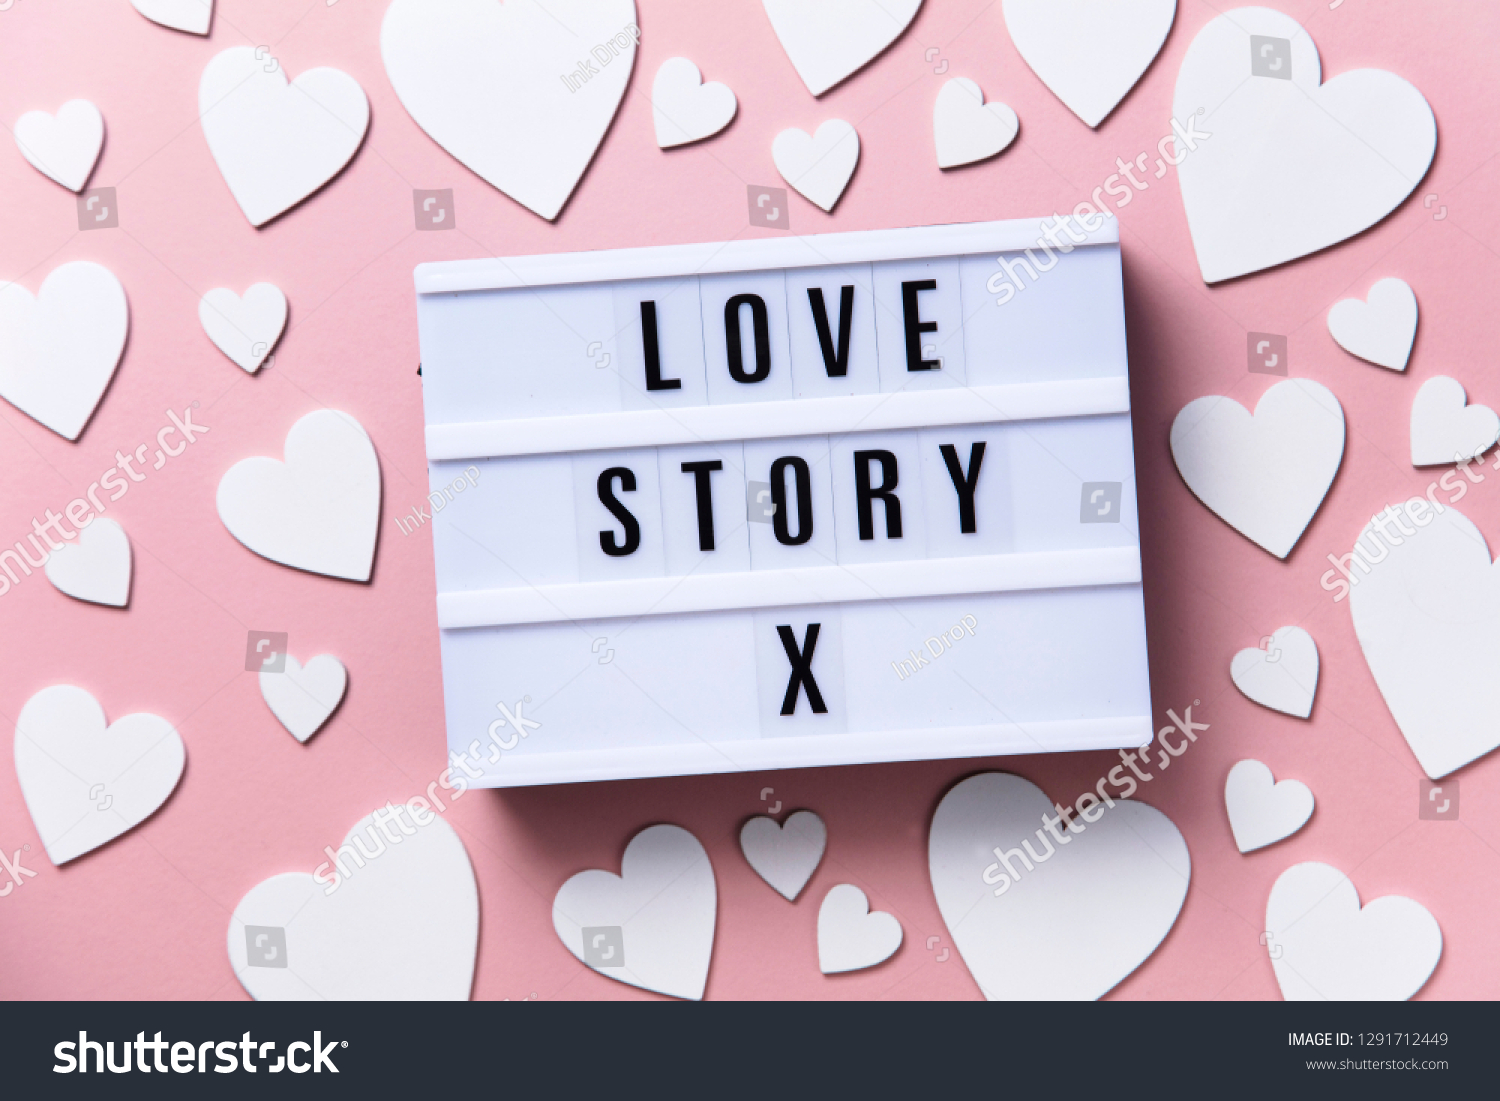 Love story lightbox message with white hearts on a pink background #1291712449